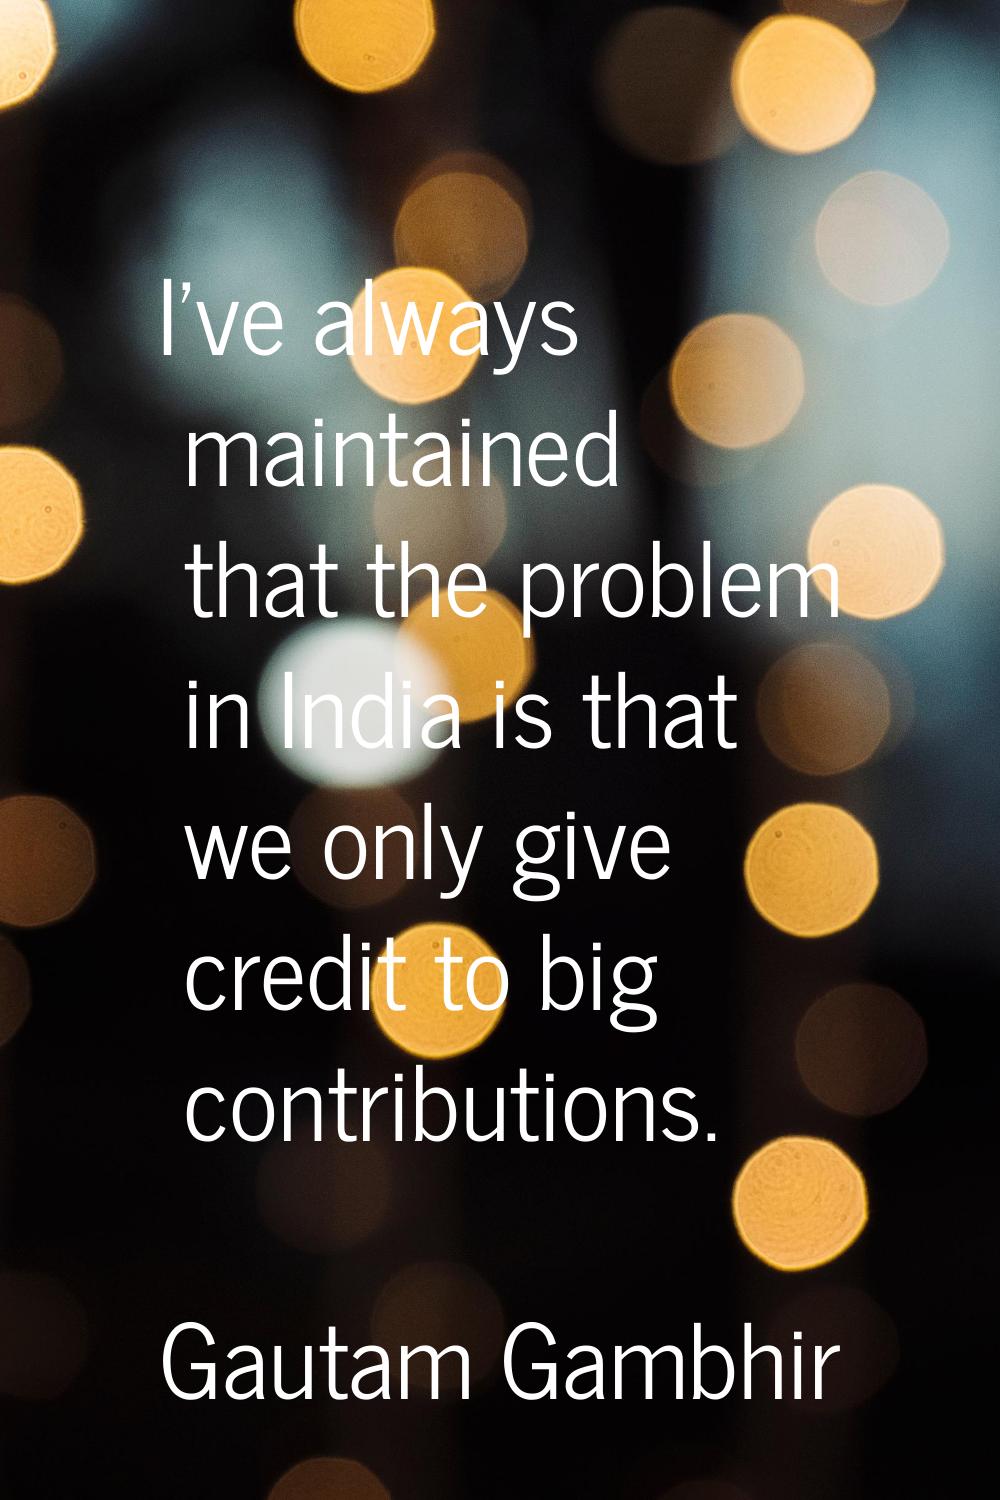 I've always maintained that the problem in India is that we only give credit to big contributions.